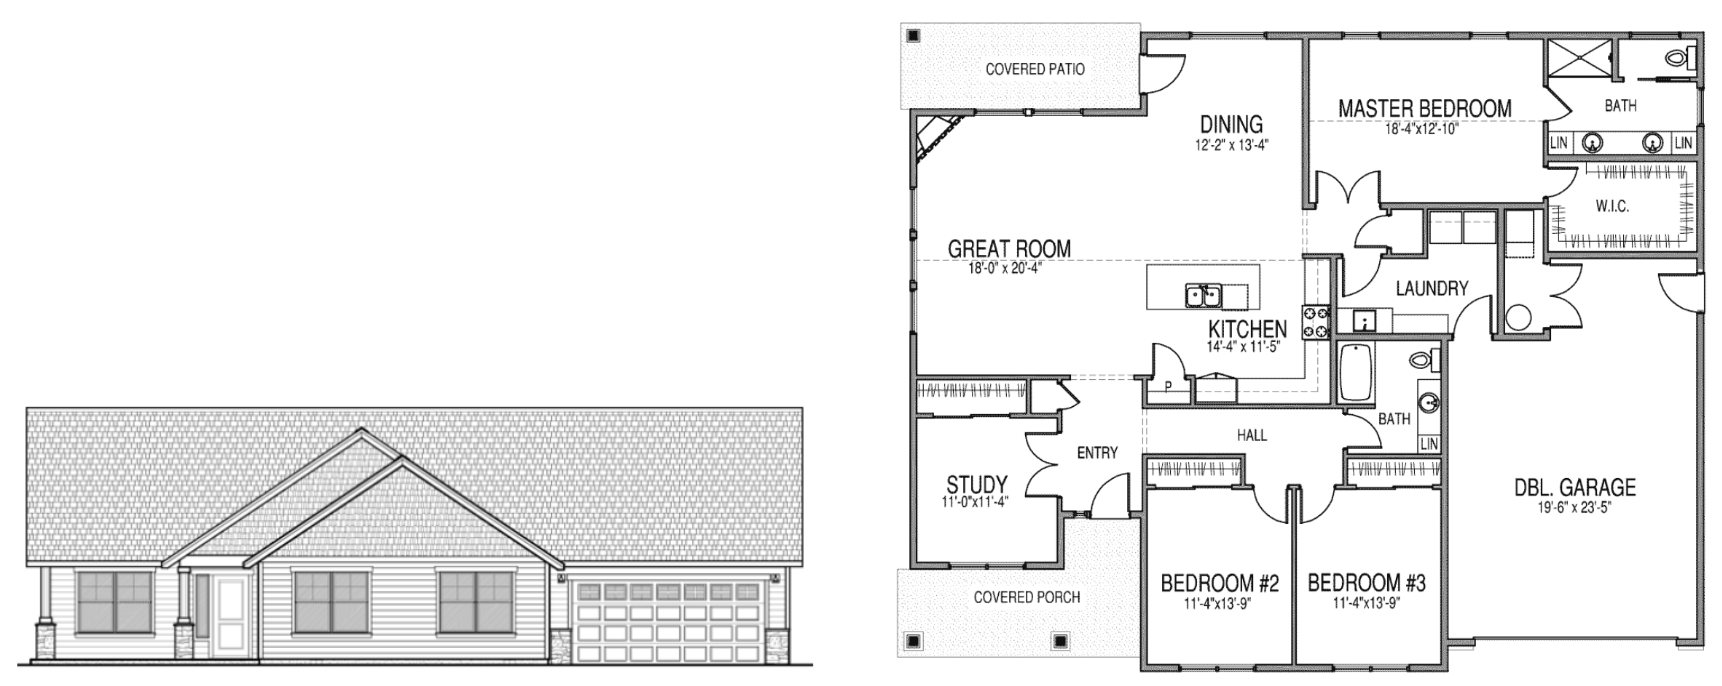 Roosevelt 1 single story home floor plan with a master bedroom with a walk in closet and bathroom, 2 additional bedrooms, another bathroom, a great room, dining space, kitchen, pantry, laundry room, study, double garage, and a covered porch and patio